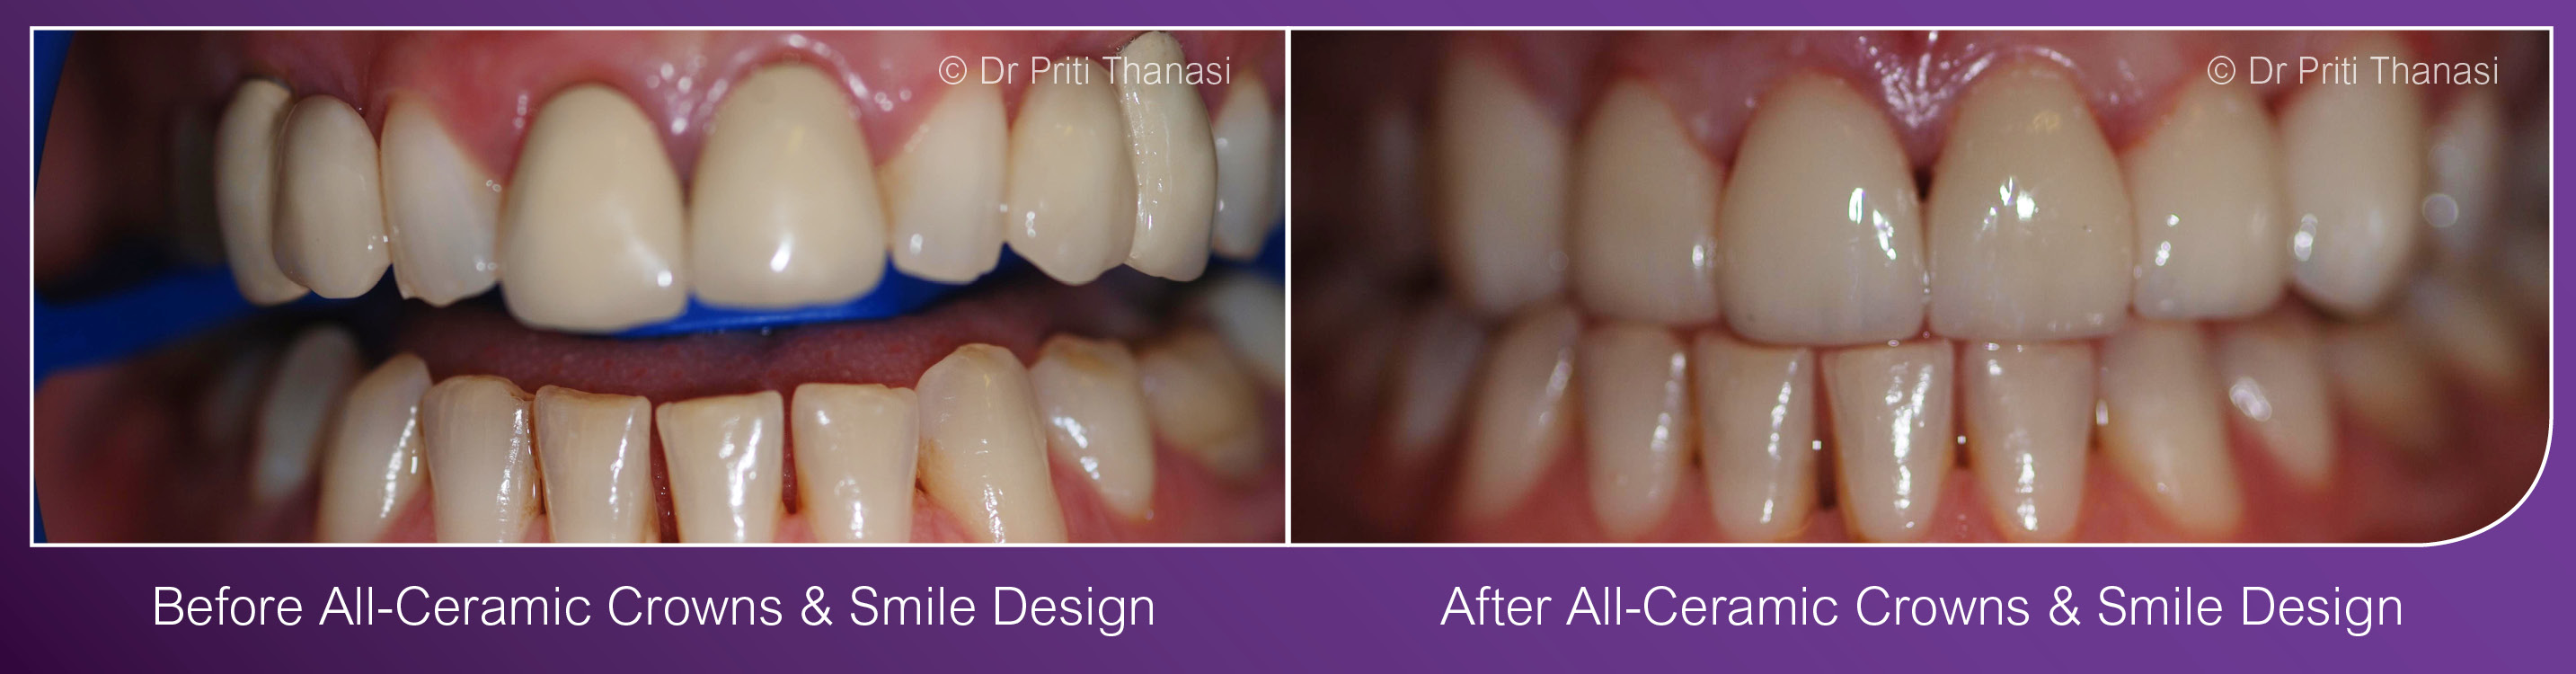 Smile Design Cosmetic Dentist Leicester